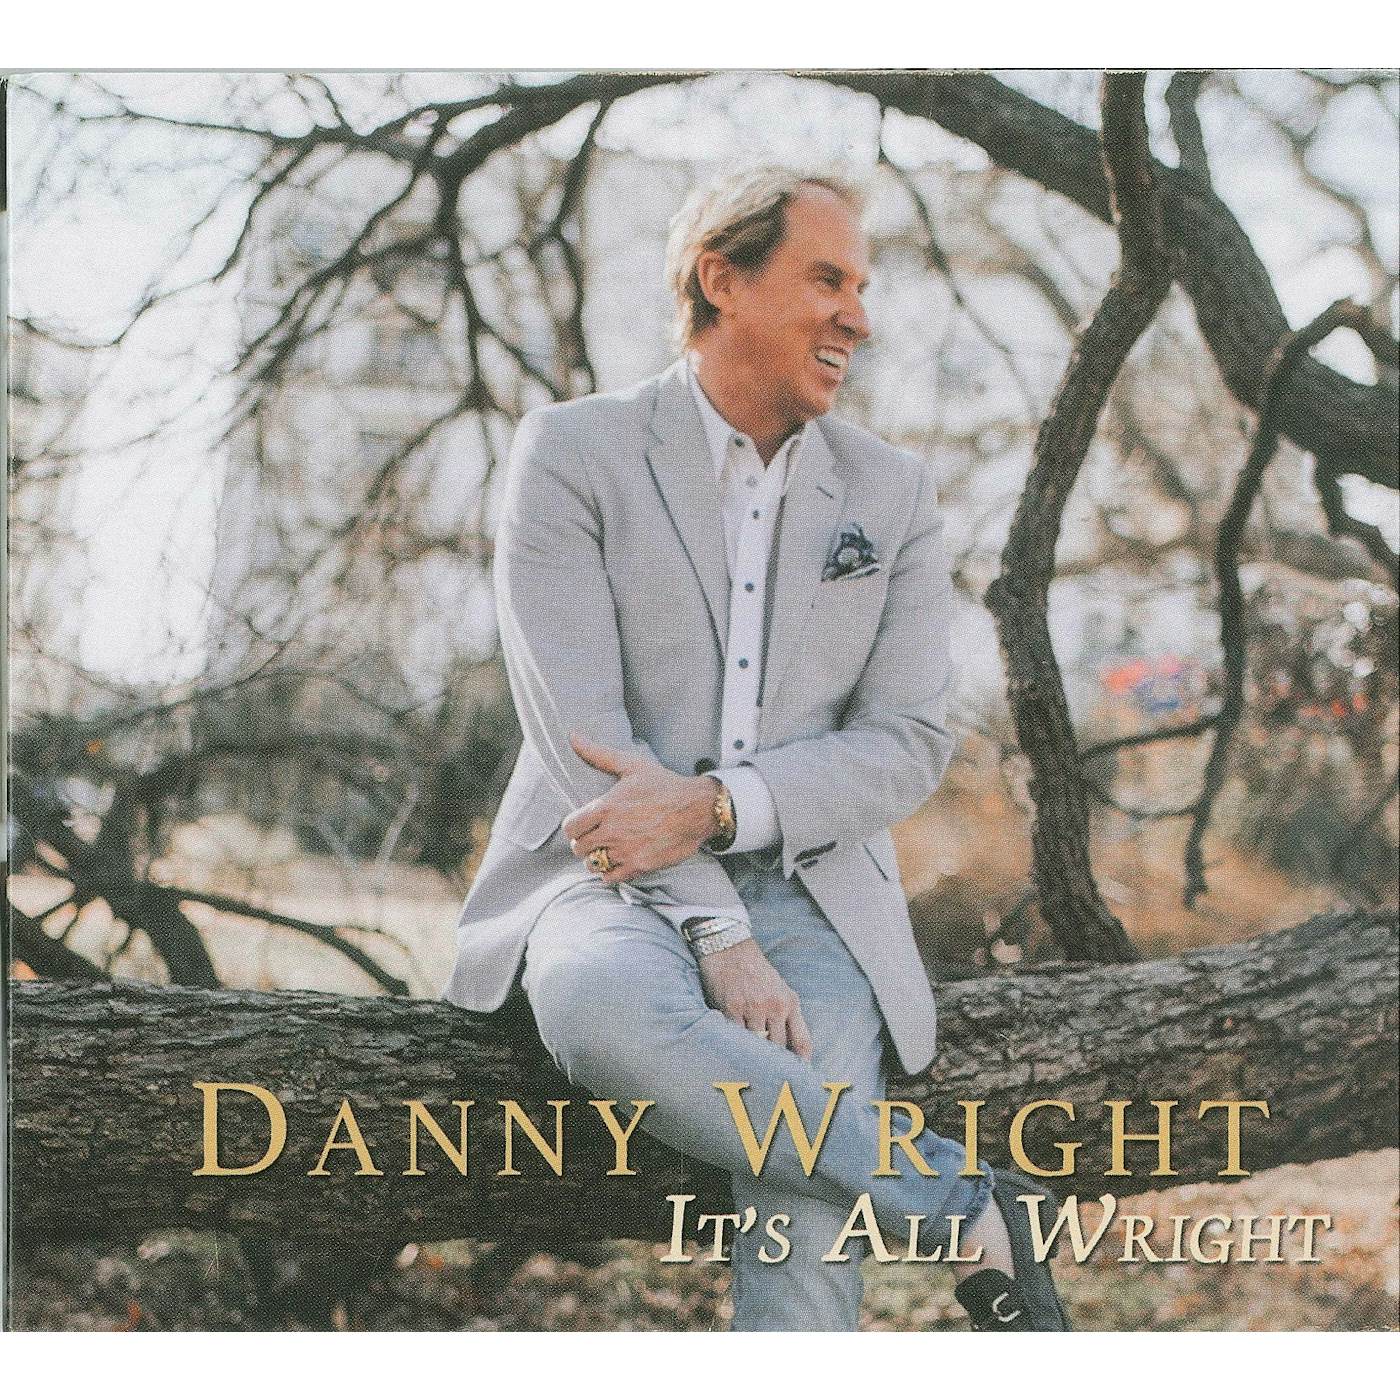 Danny Wright IT'S ALL WRIGHT CD